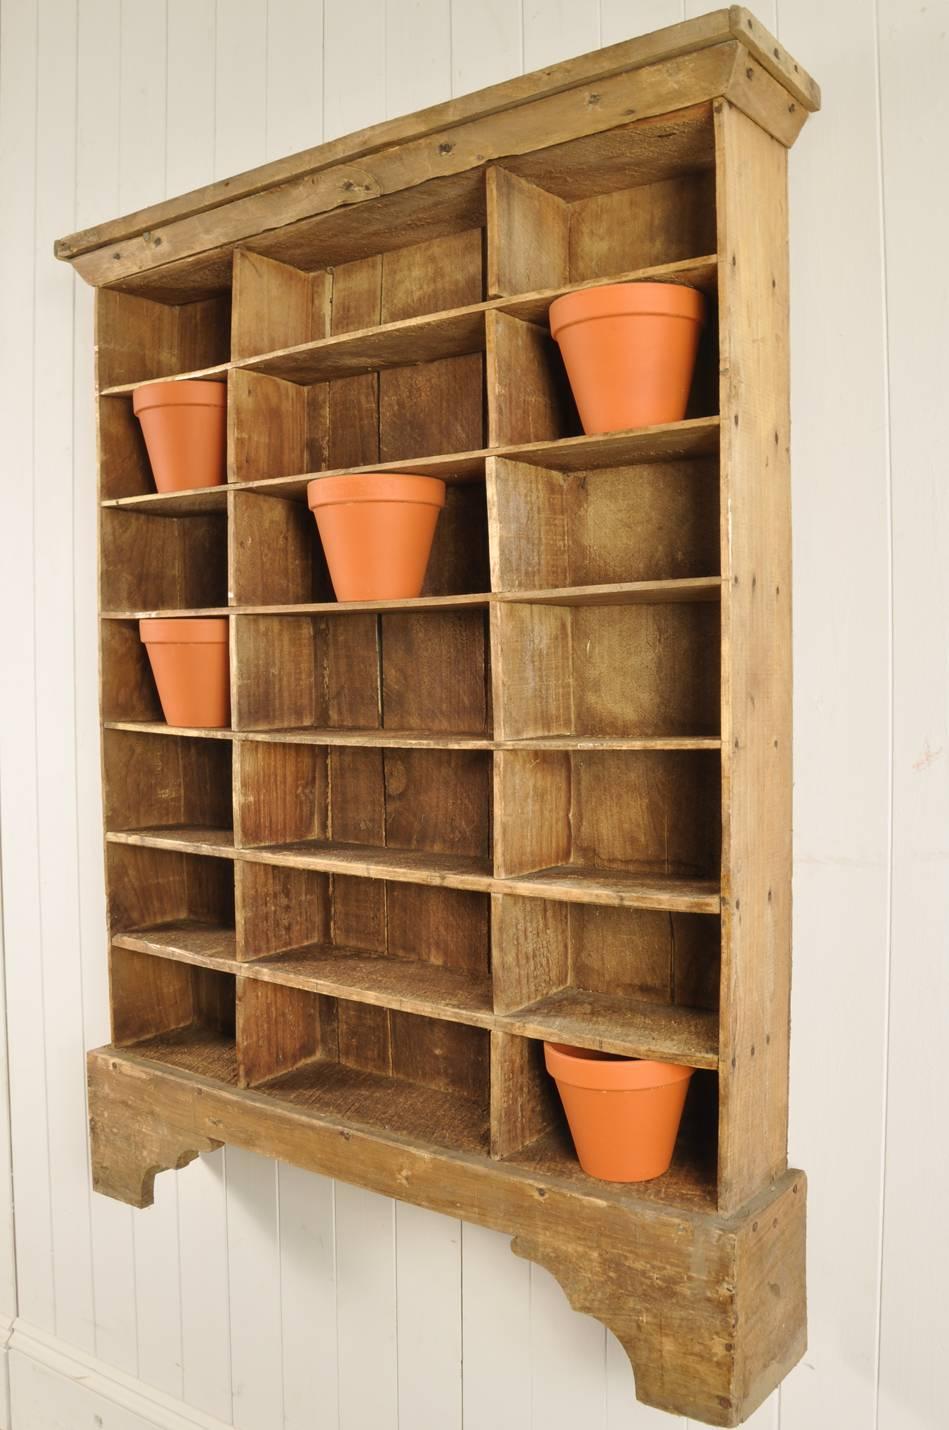 French Vintage Wooden Display Shelves In Good Condition For Sale In Cirencester, Gloucestershire